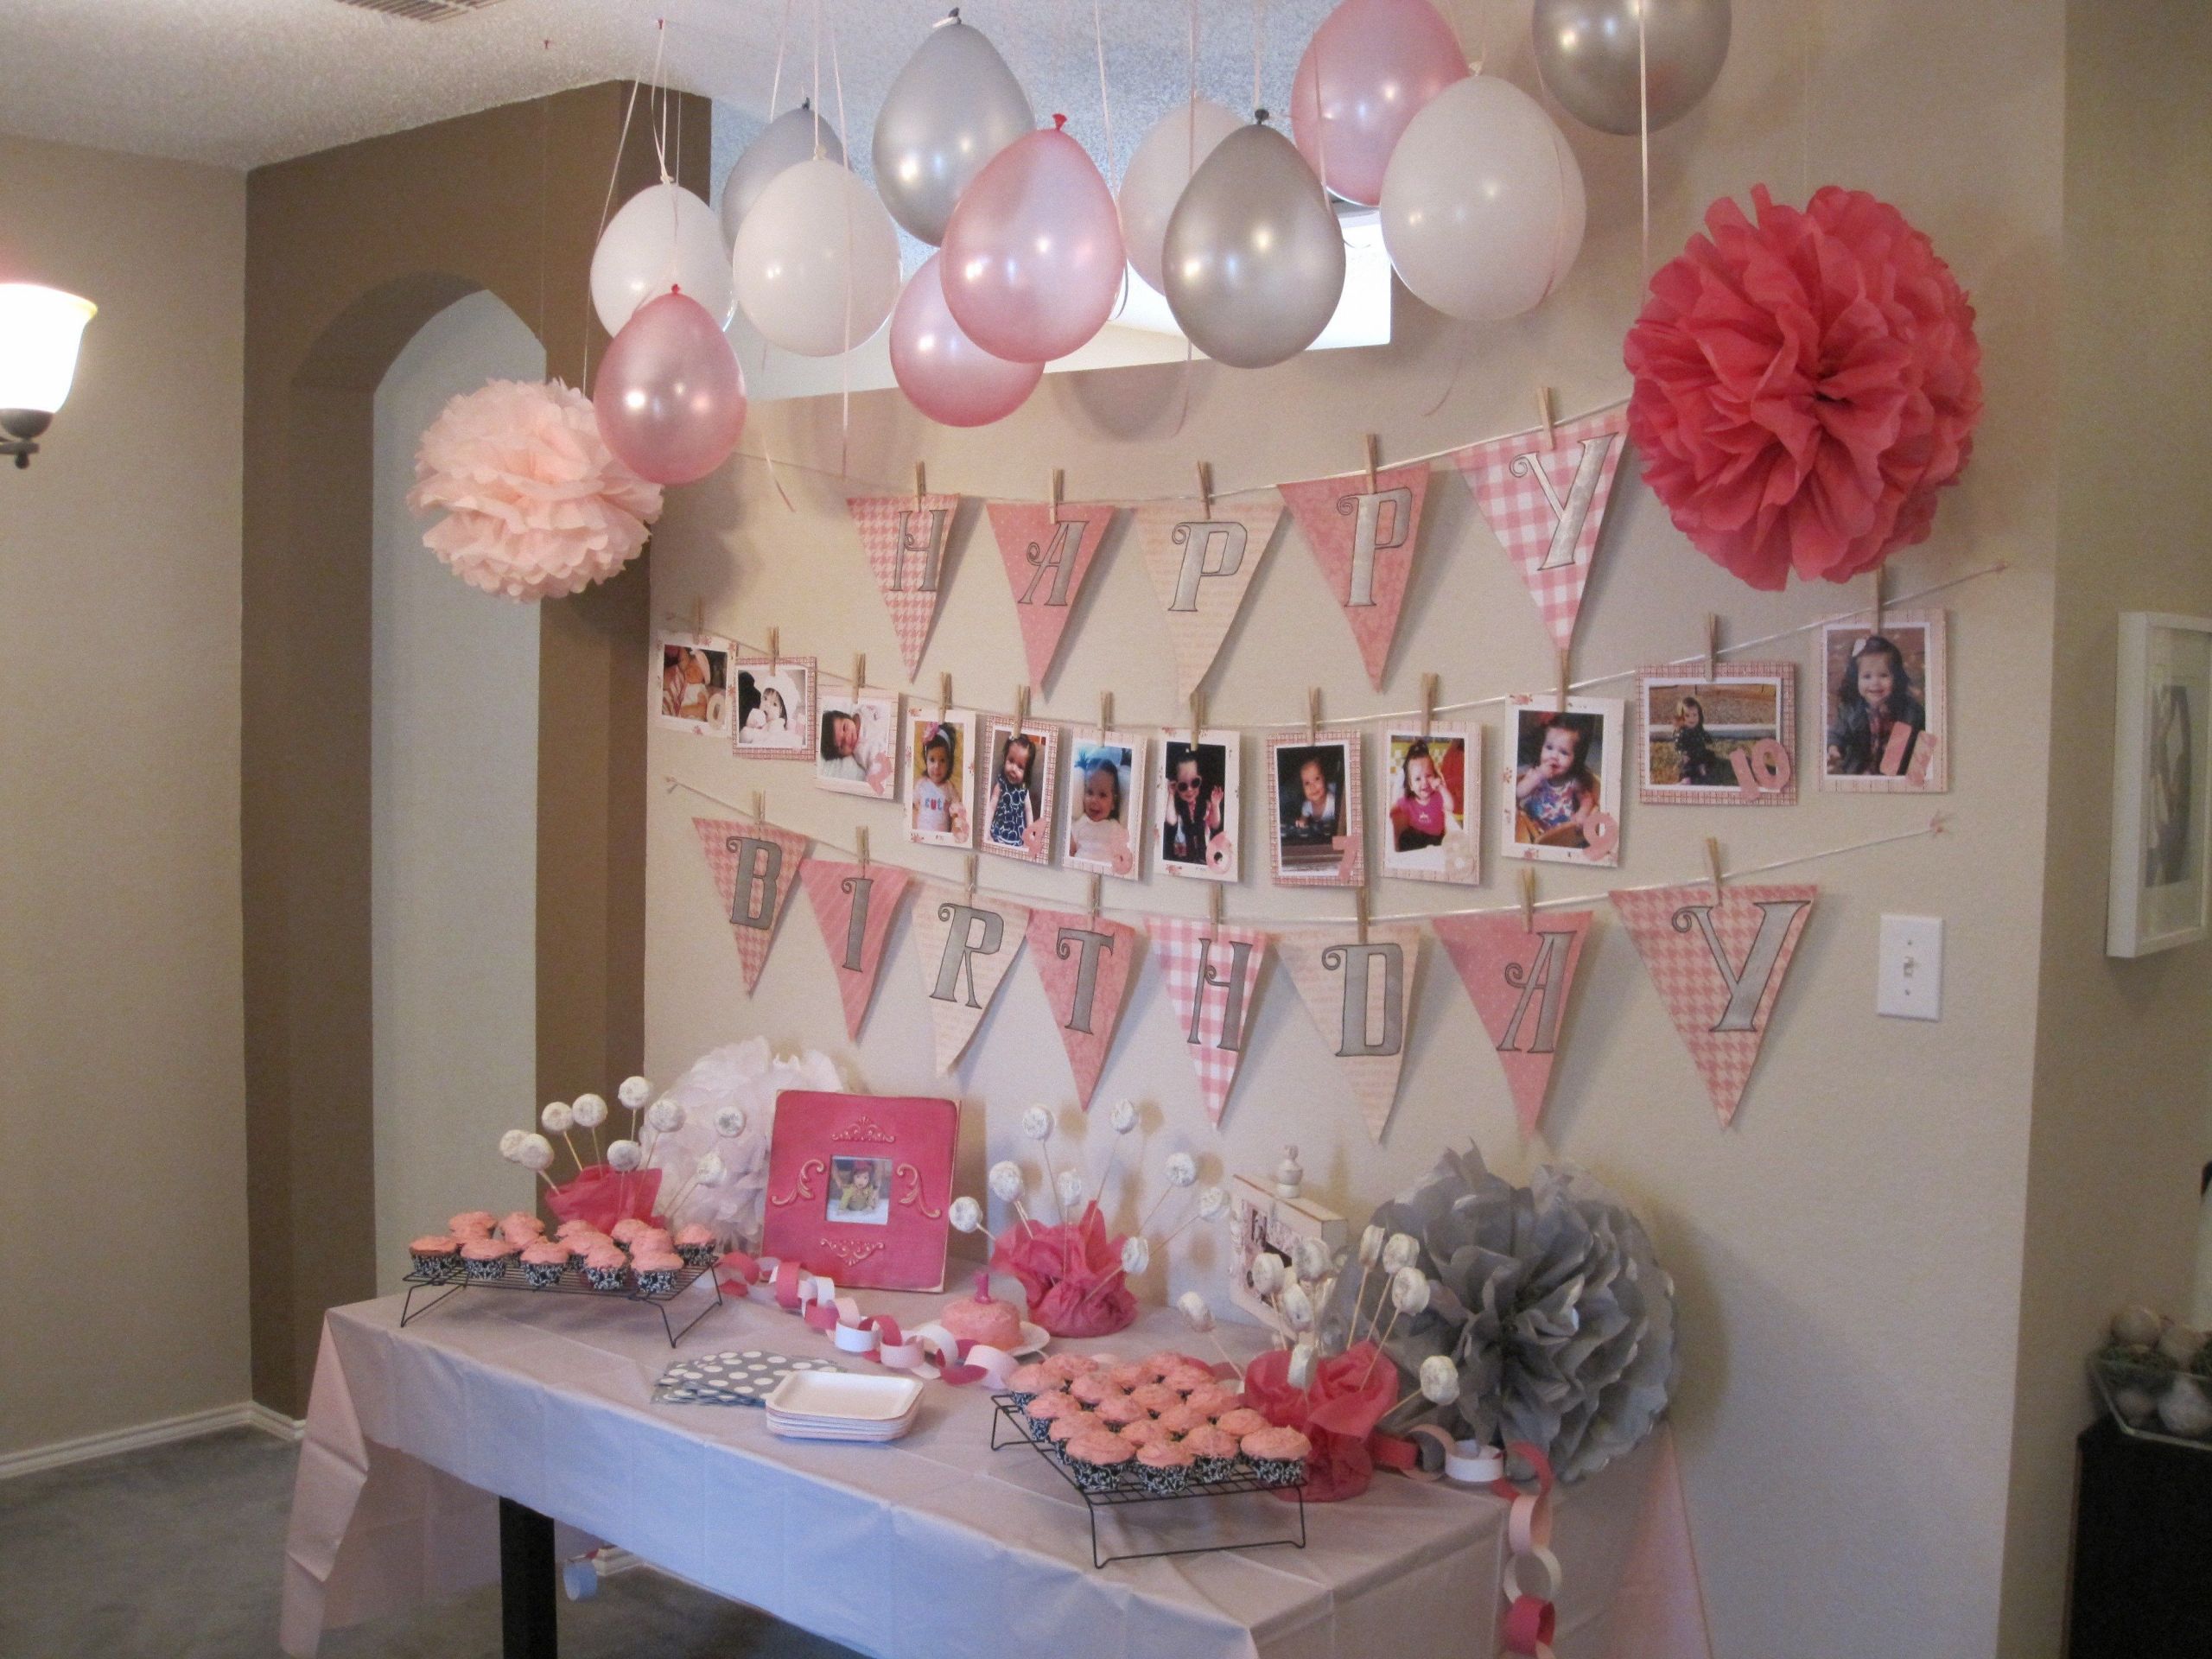 Birthday Party Decorations At Home
 Fresh First Birthday Decoration Ideas at Home for Girl